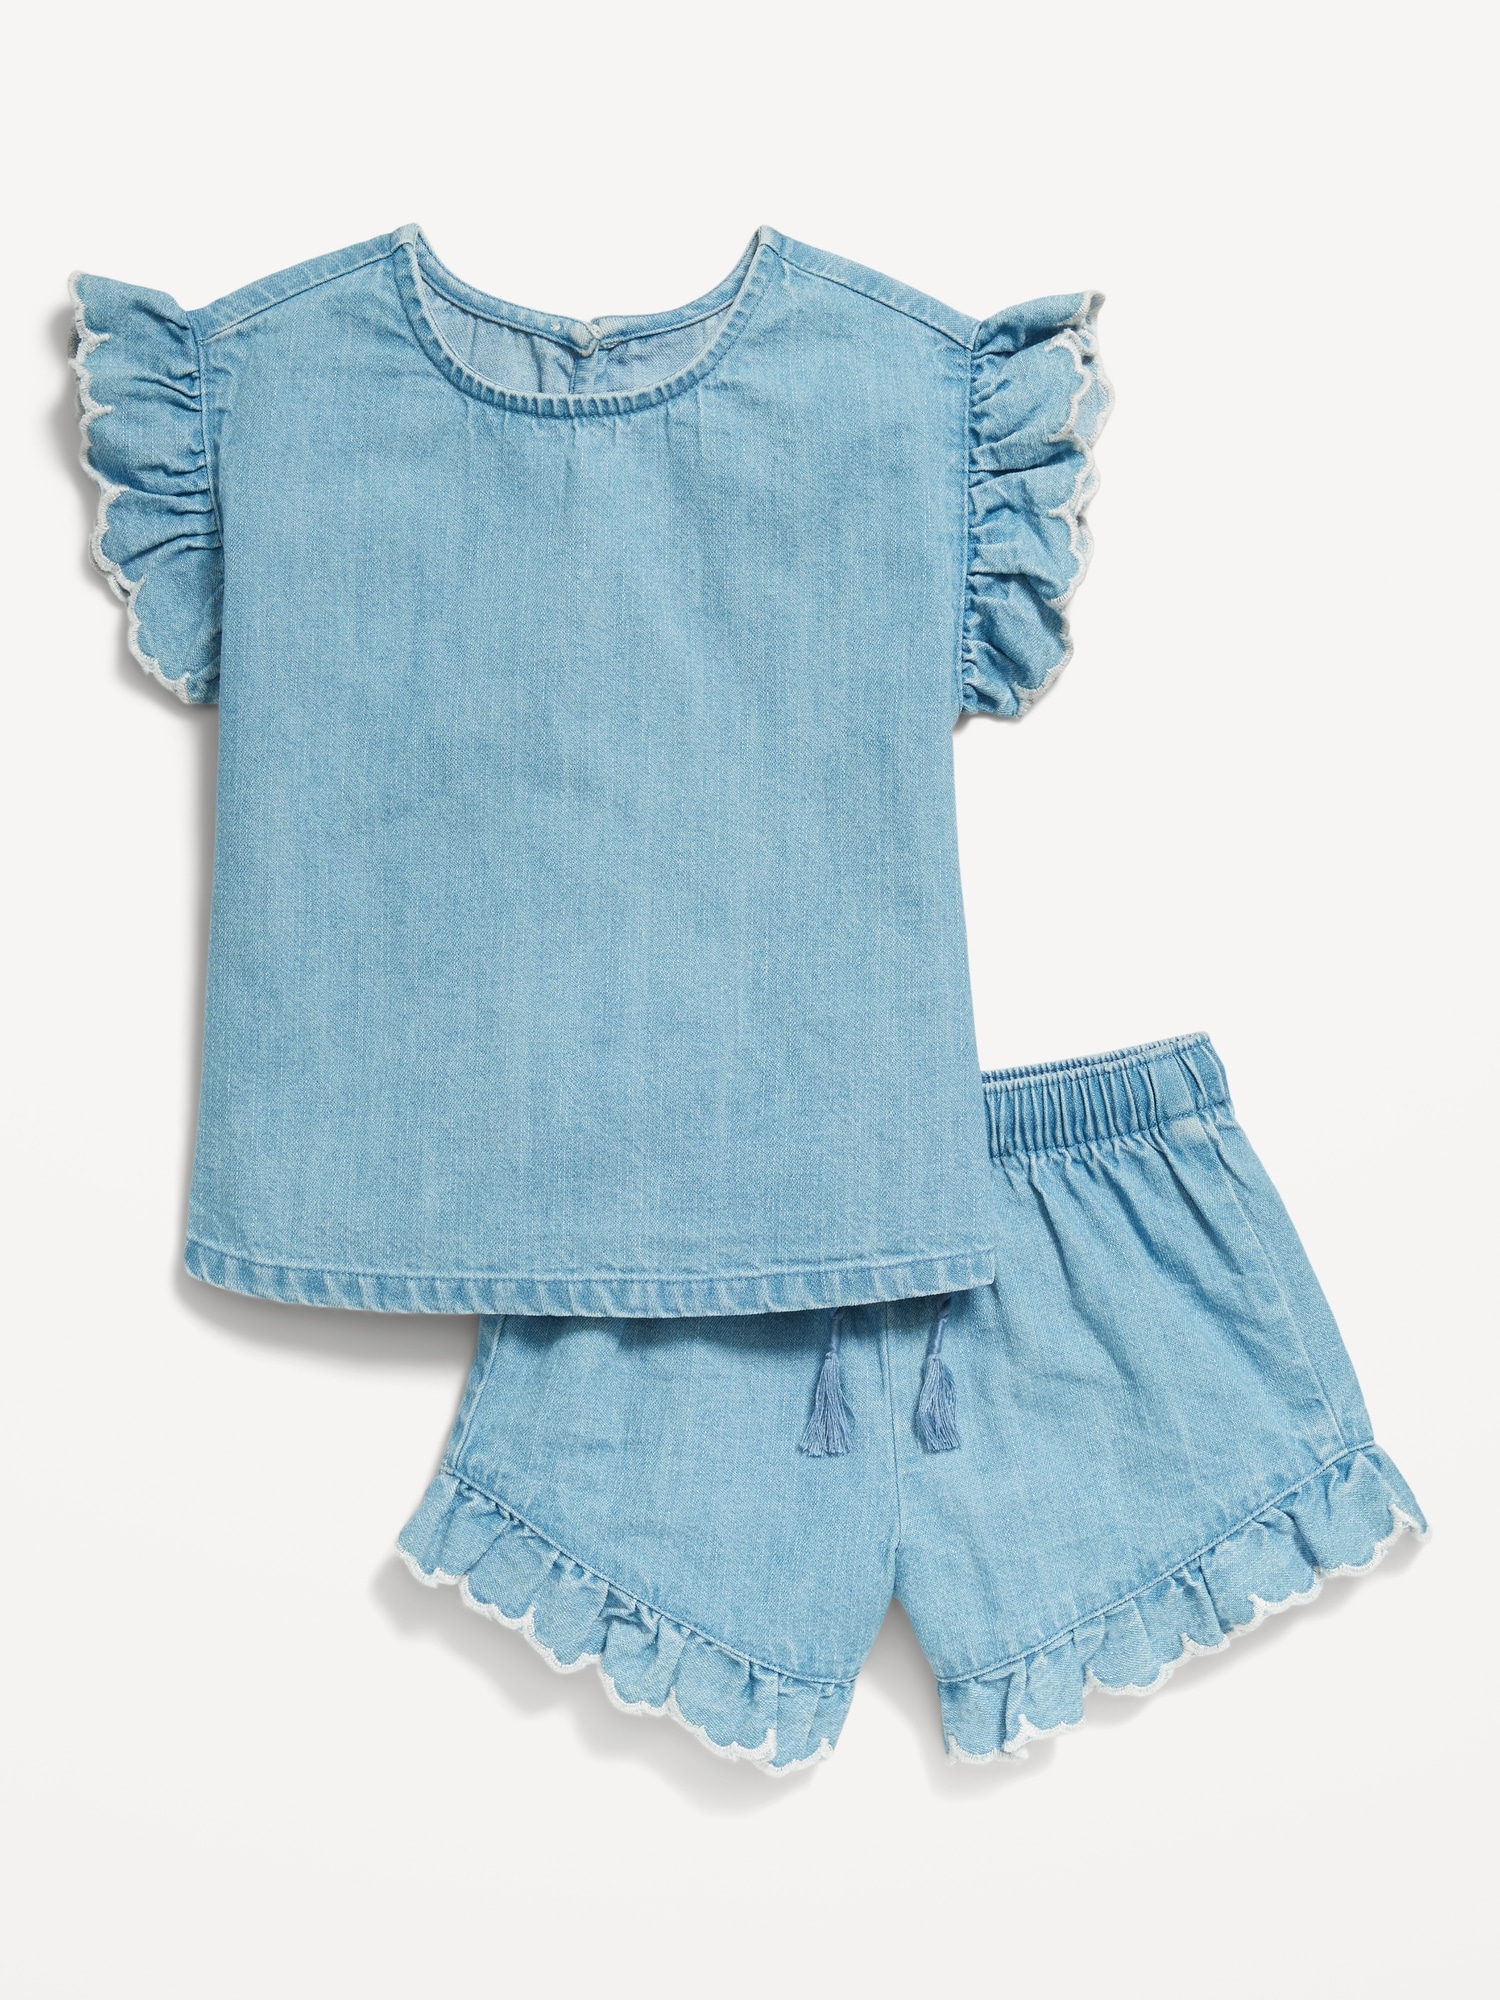 Short-Sleeve Ruffled Top and Shorts Set for Toddler Girls